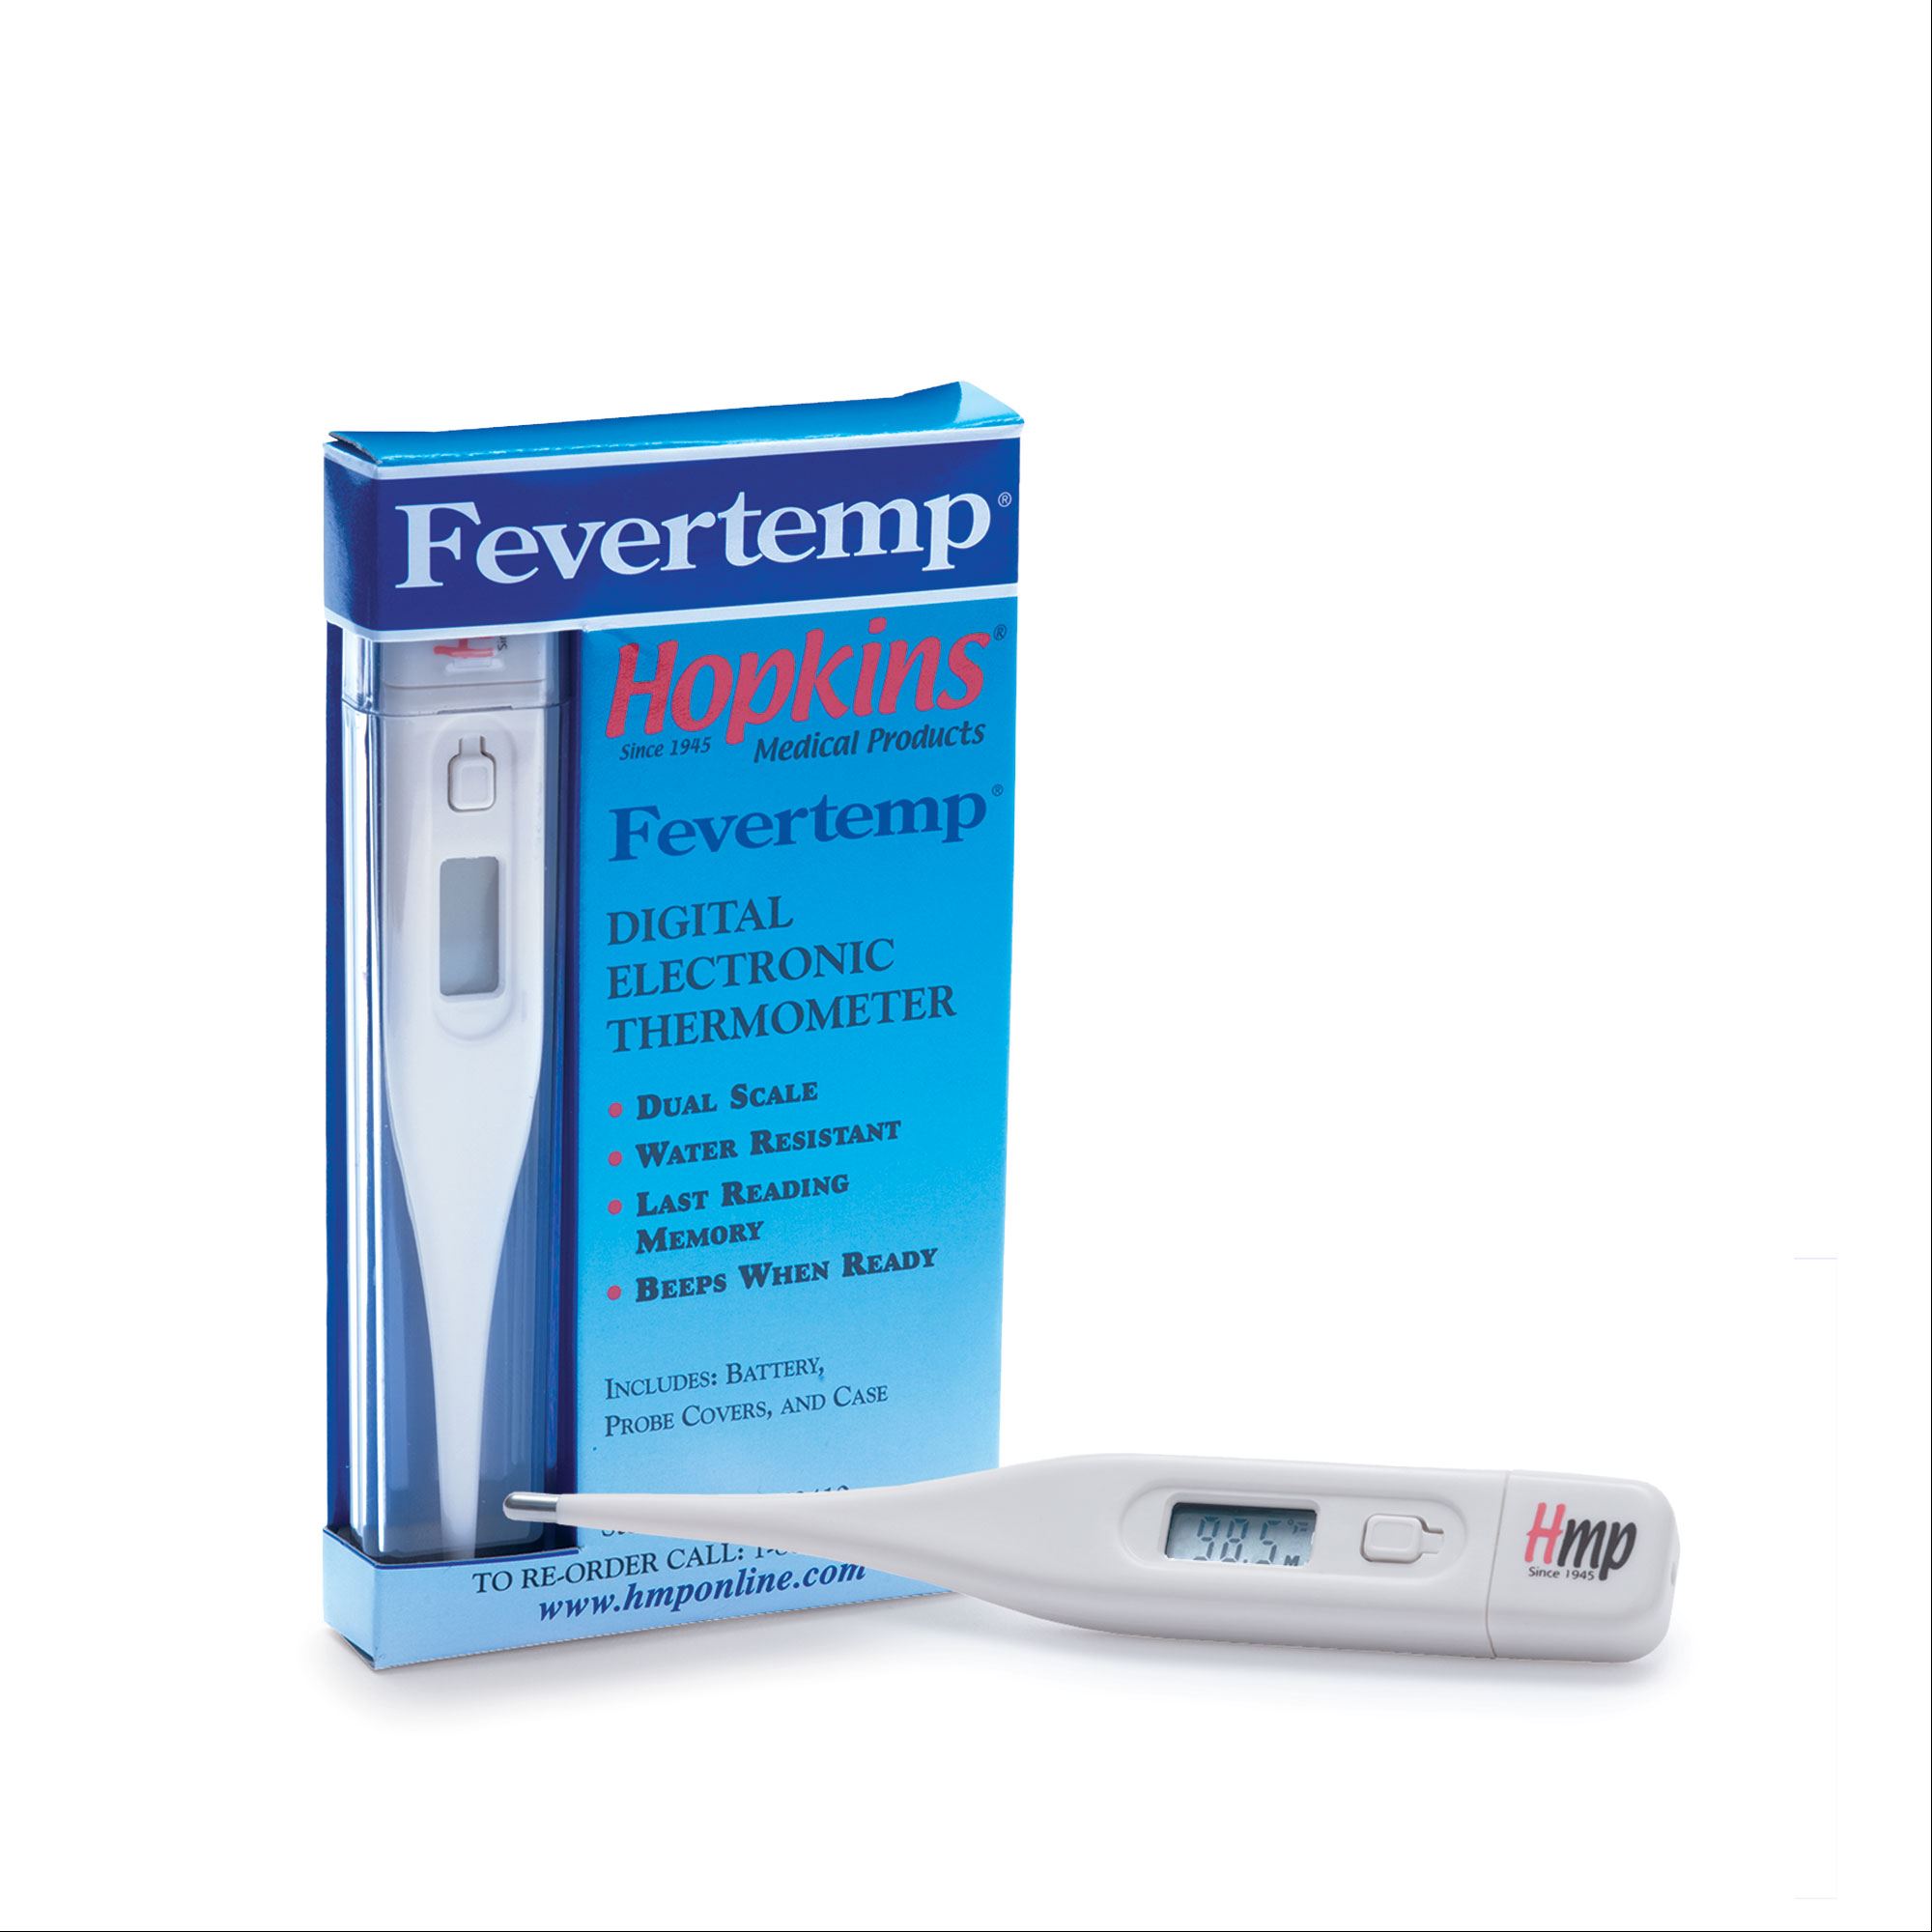 Fevertemp Digital Thermometer - Hopkins Medical Products